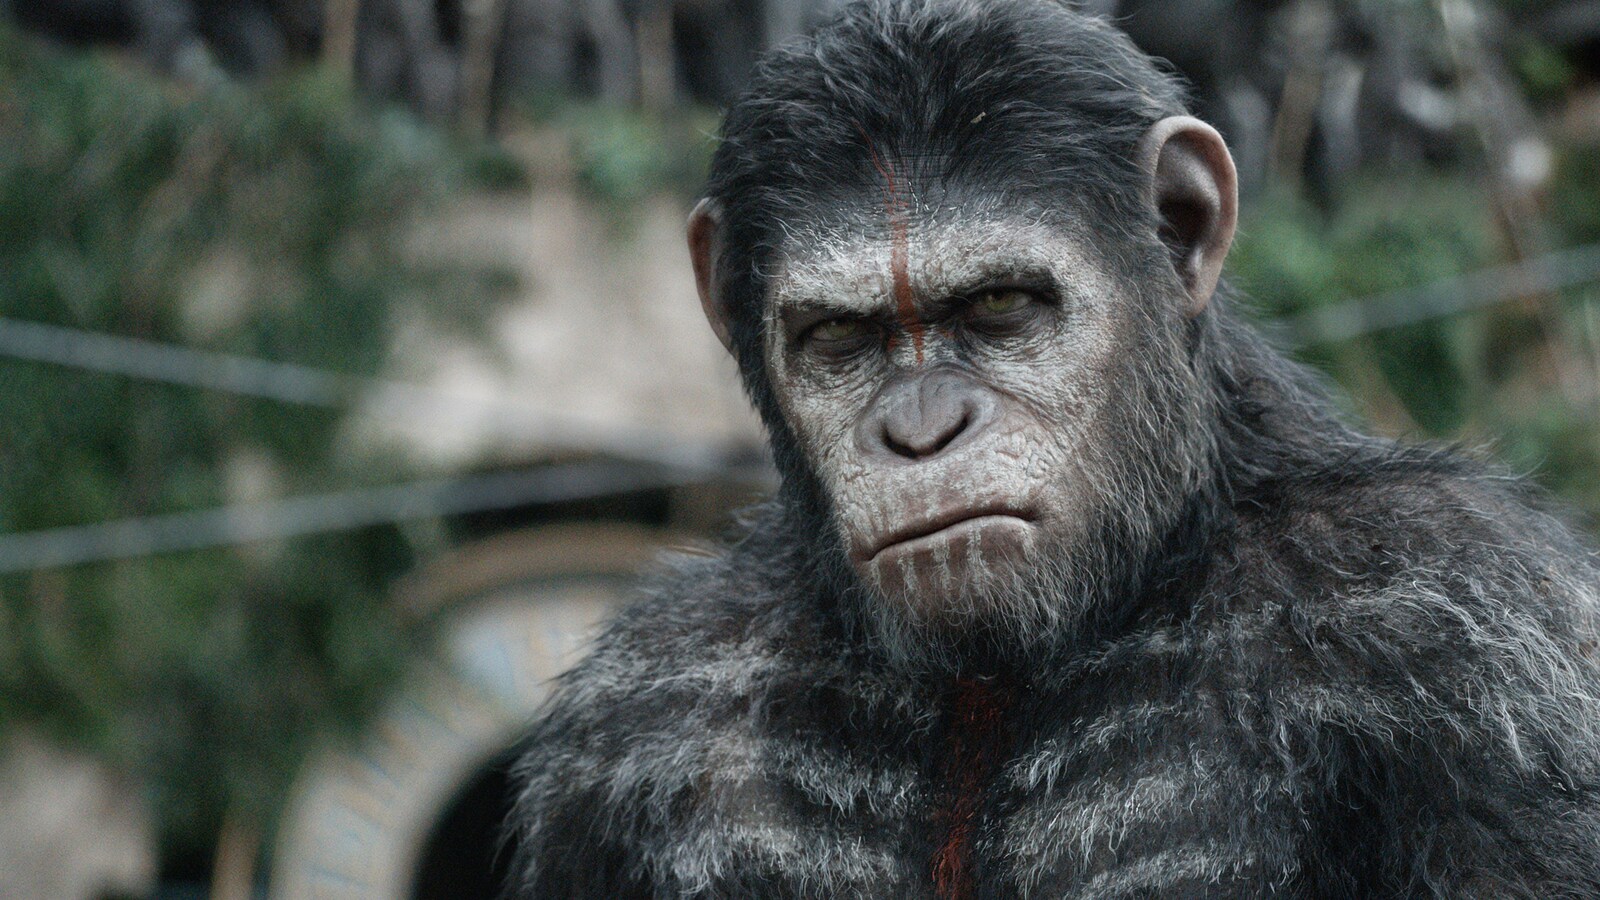 dawn-of-the-planet-of-the-apes-2014